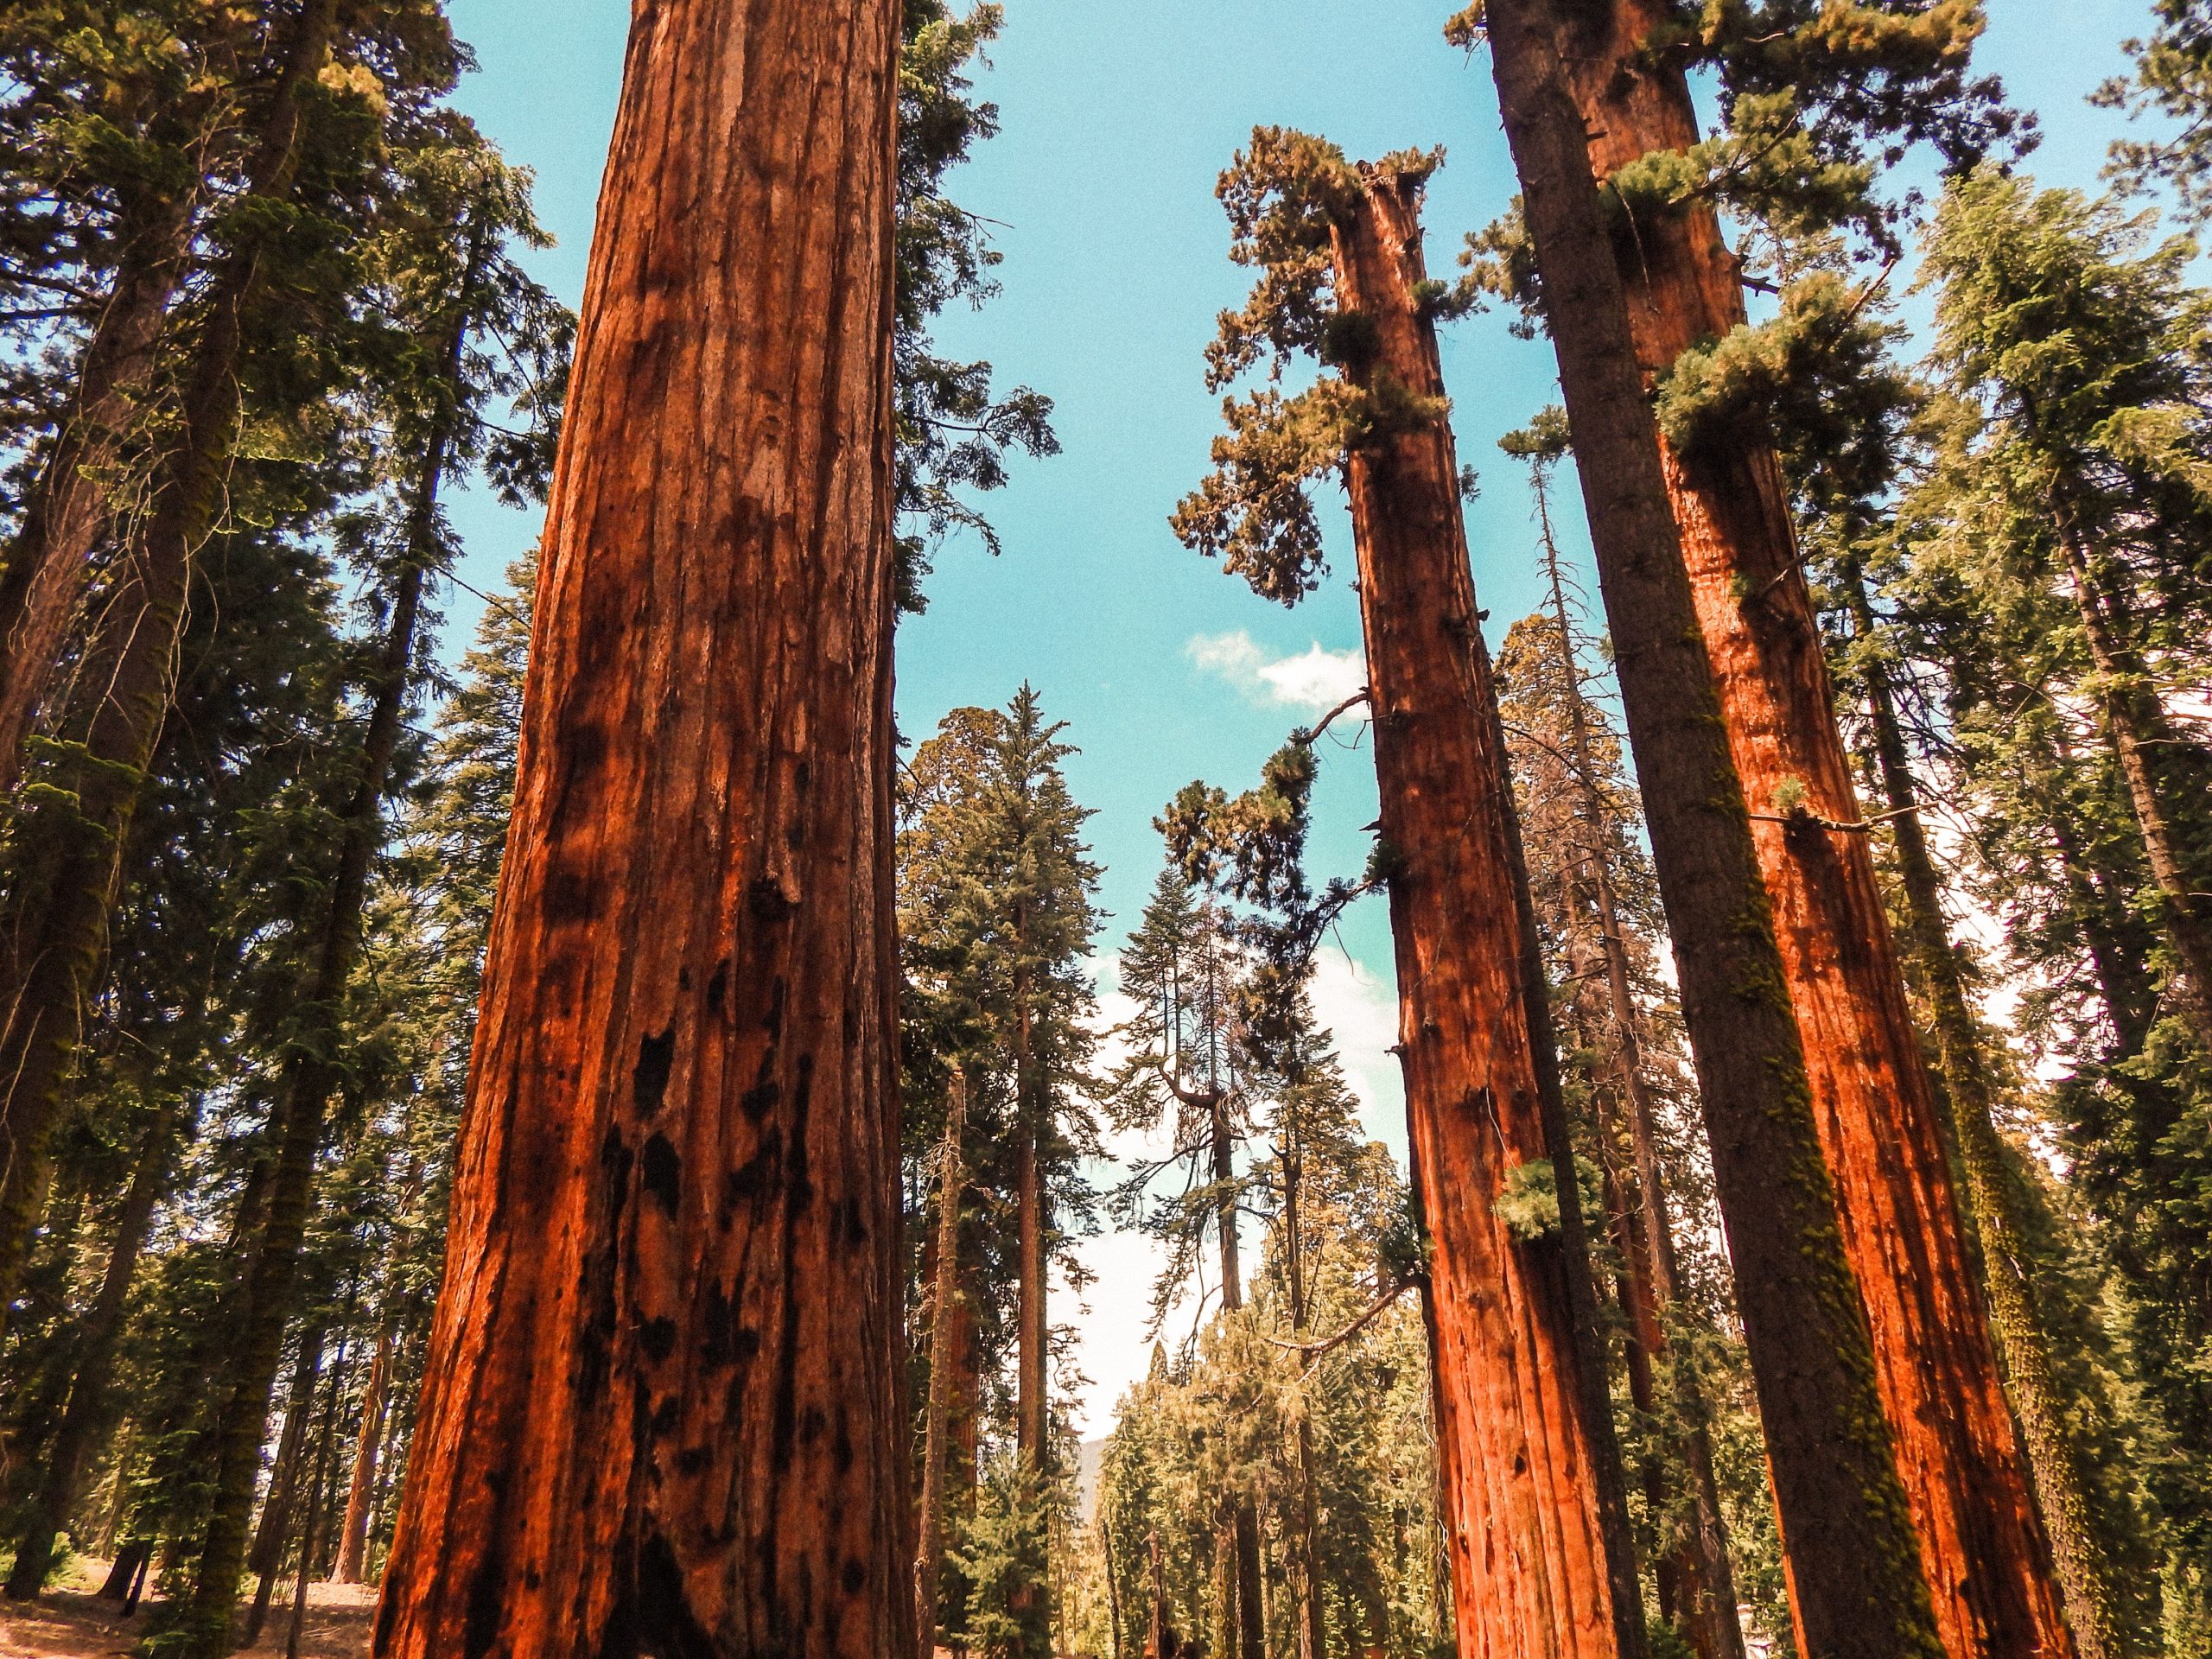 US takes emergency action to save giant sequoias from wildfires